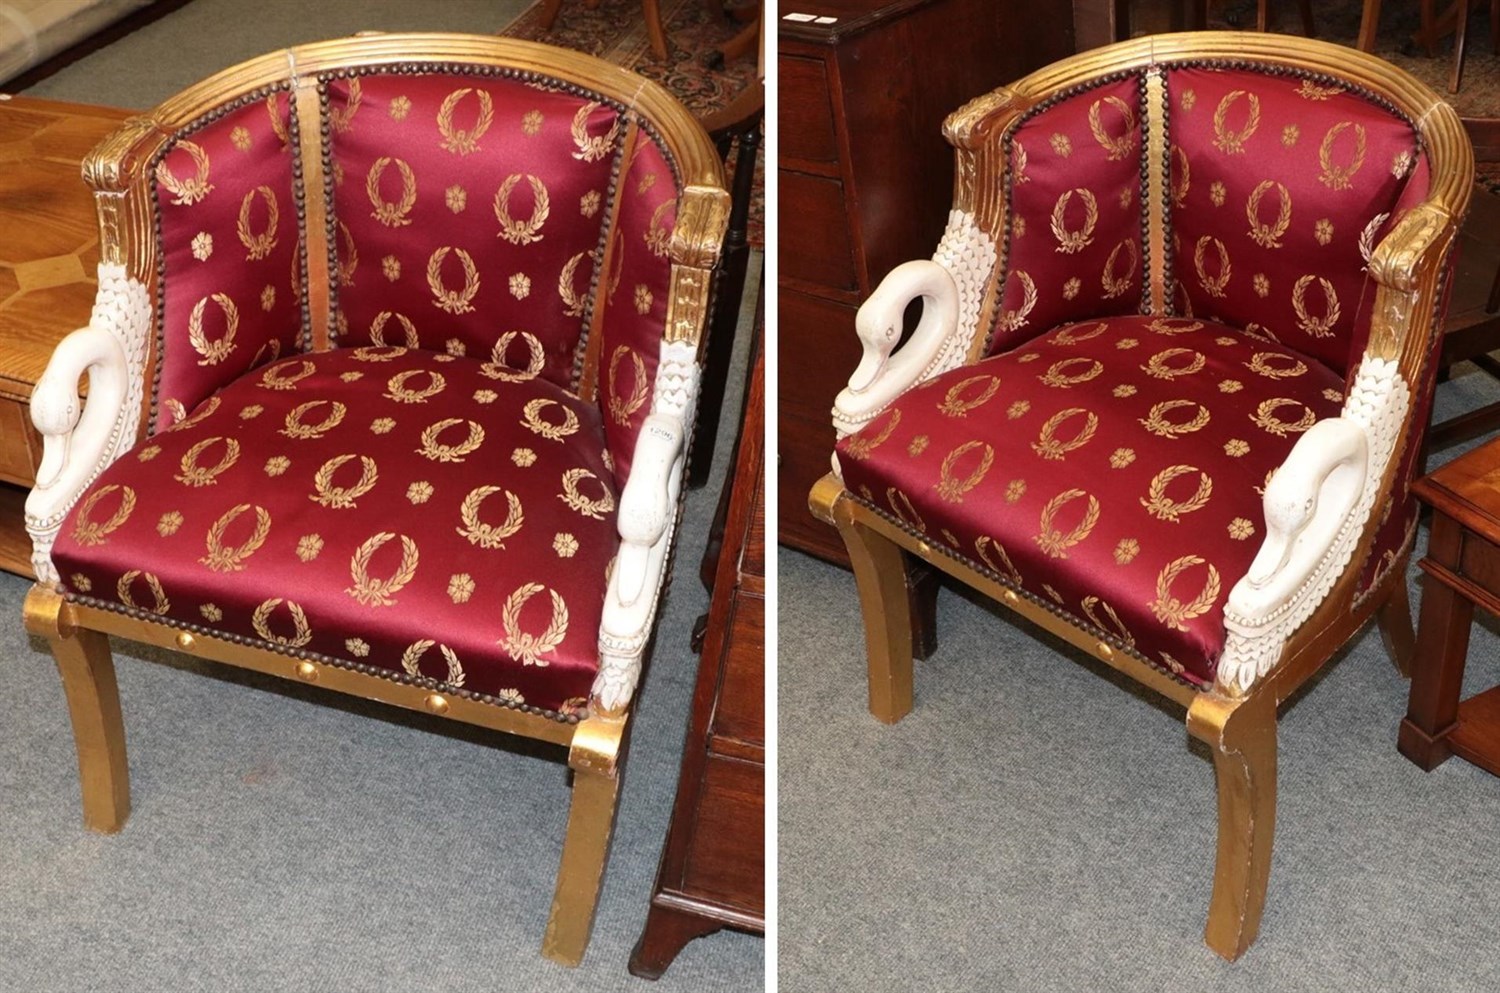 Lot 1296 - A pair of Empire style gilt decorated swan neck armchairs (2)